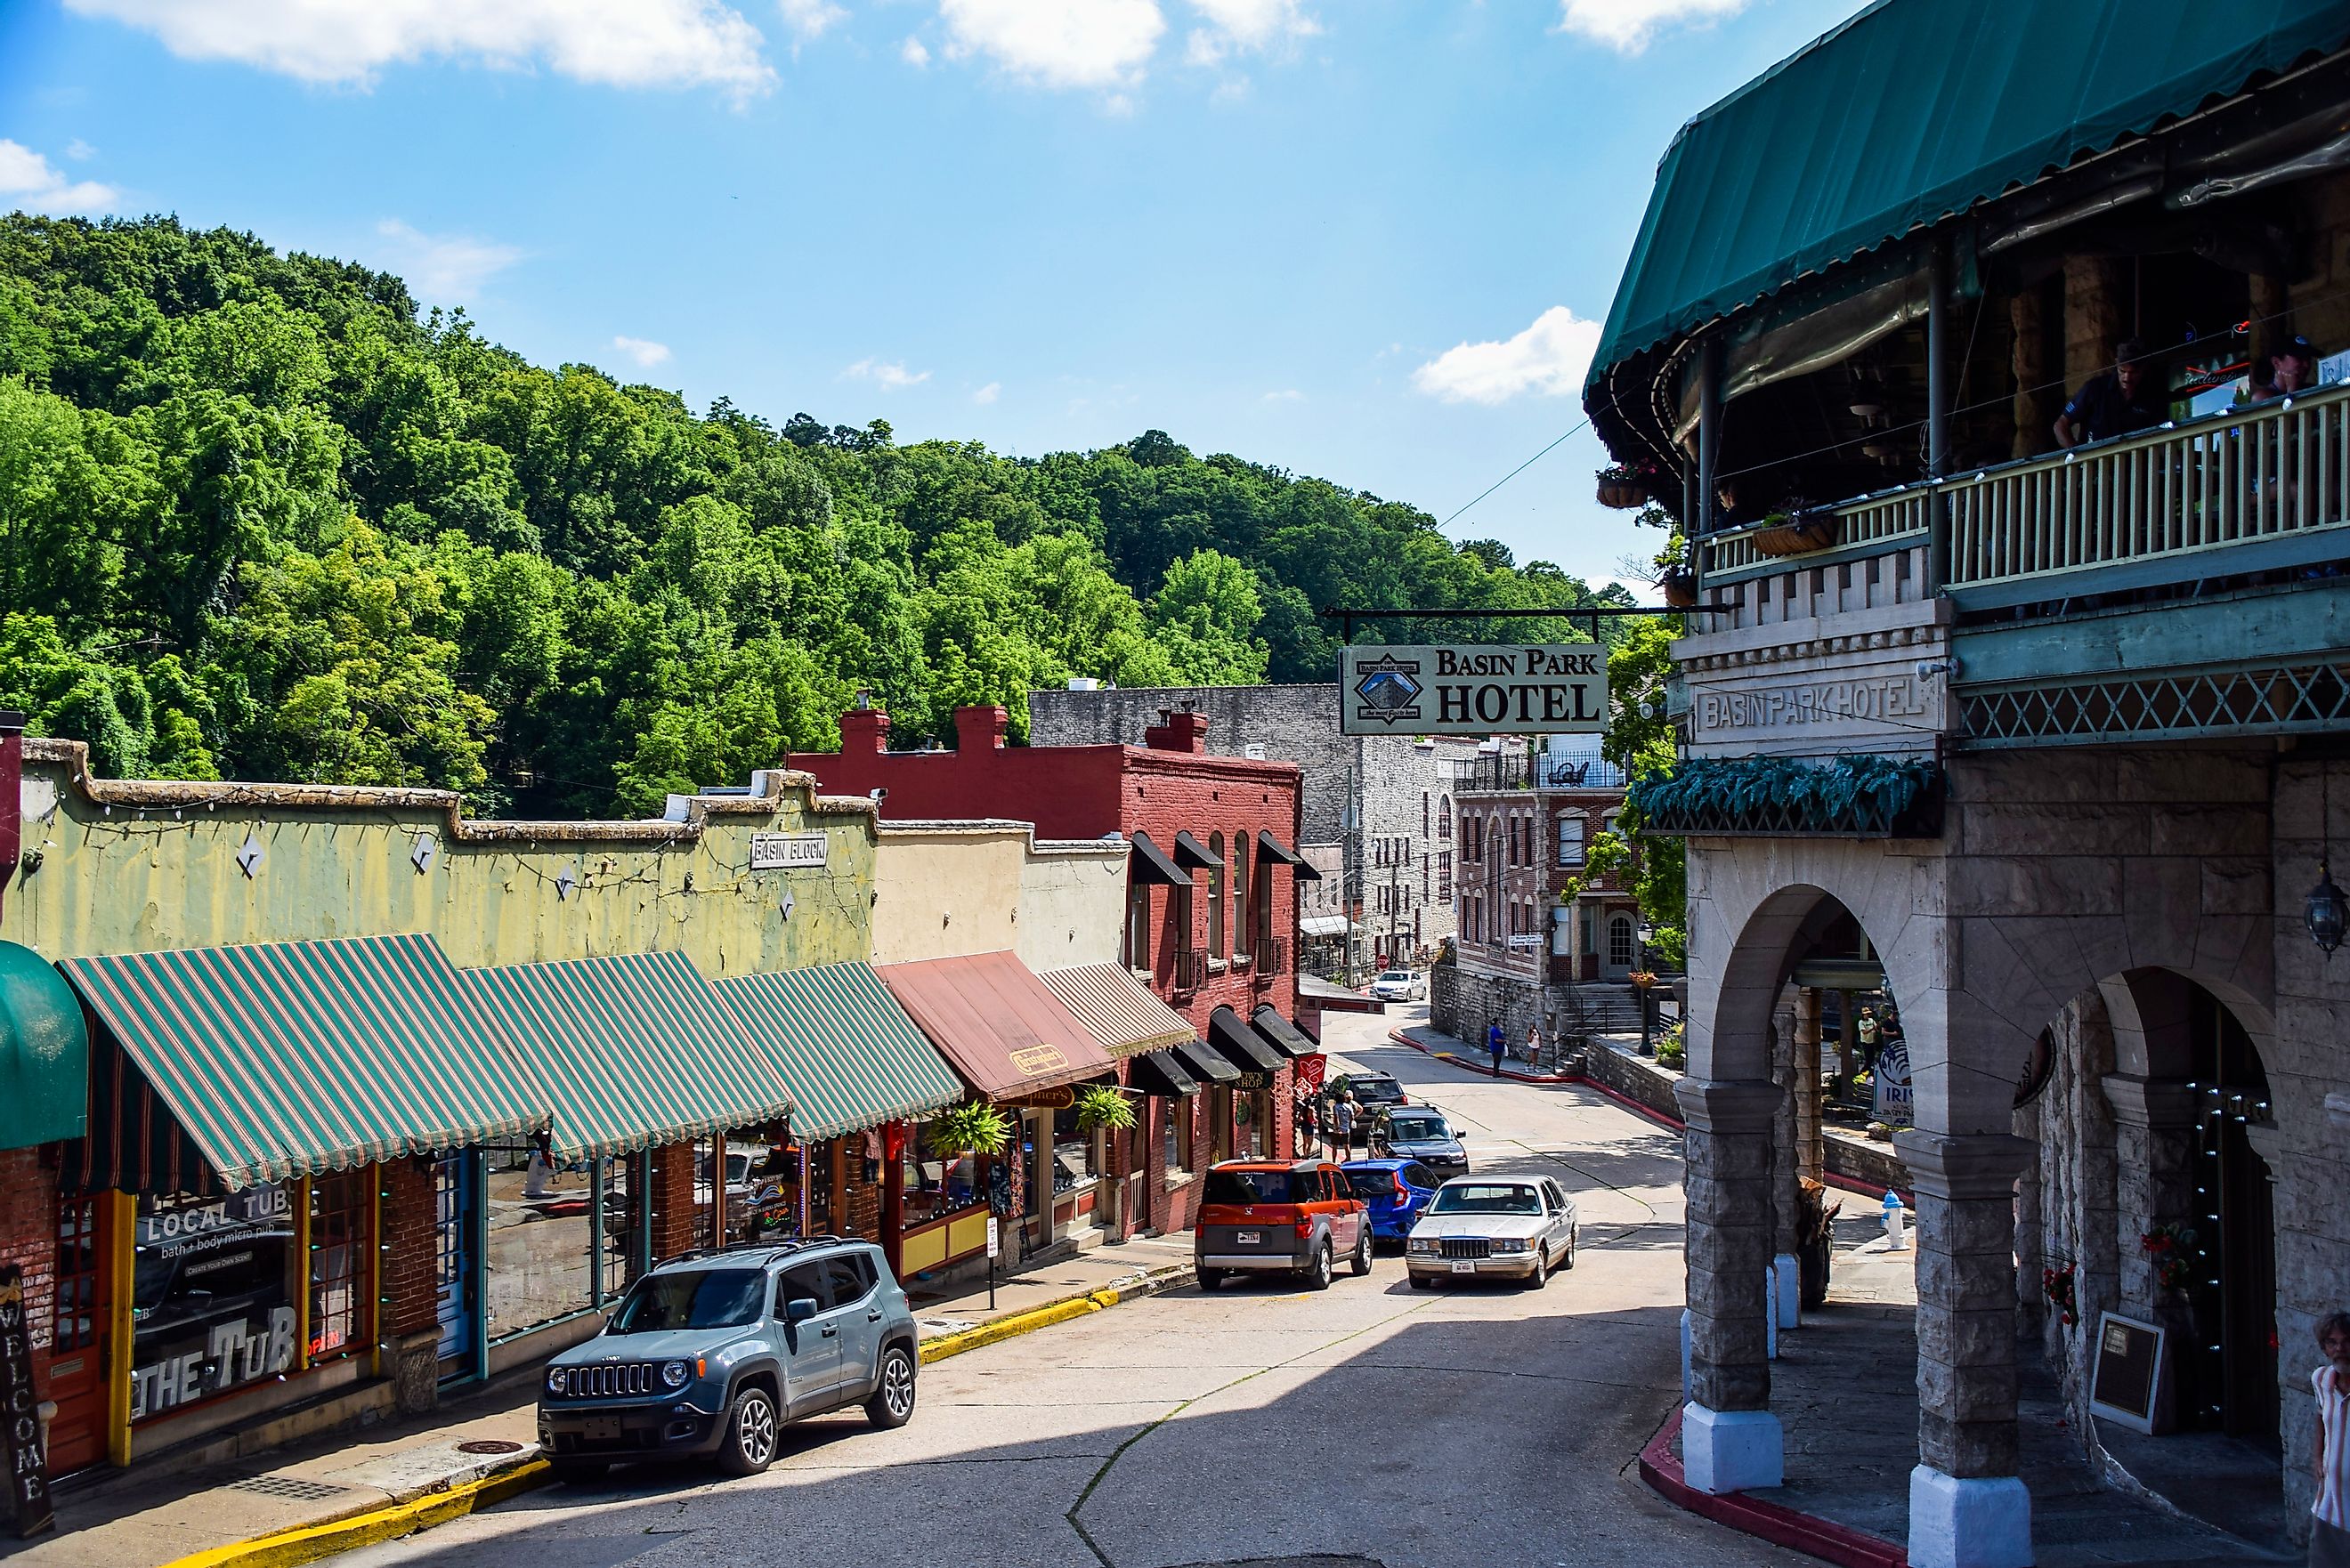 Historic downtown Eureka Springs, AR, with boutique shops and famous buildings. Editorial credit: Rachael Martin / Shutterstock.com